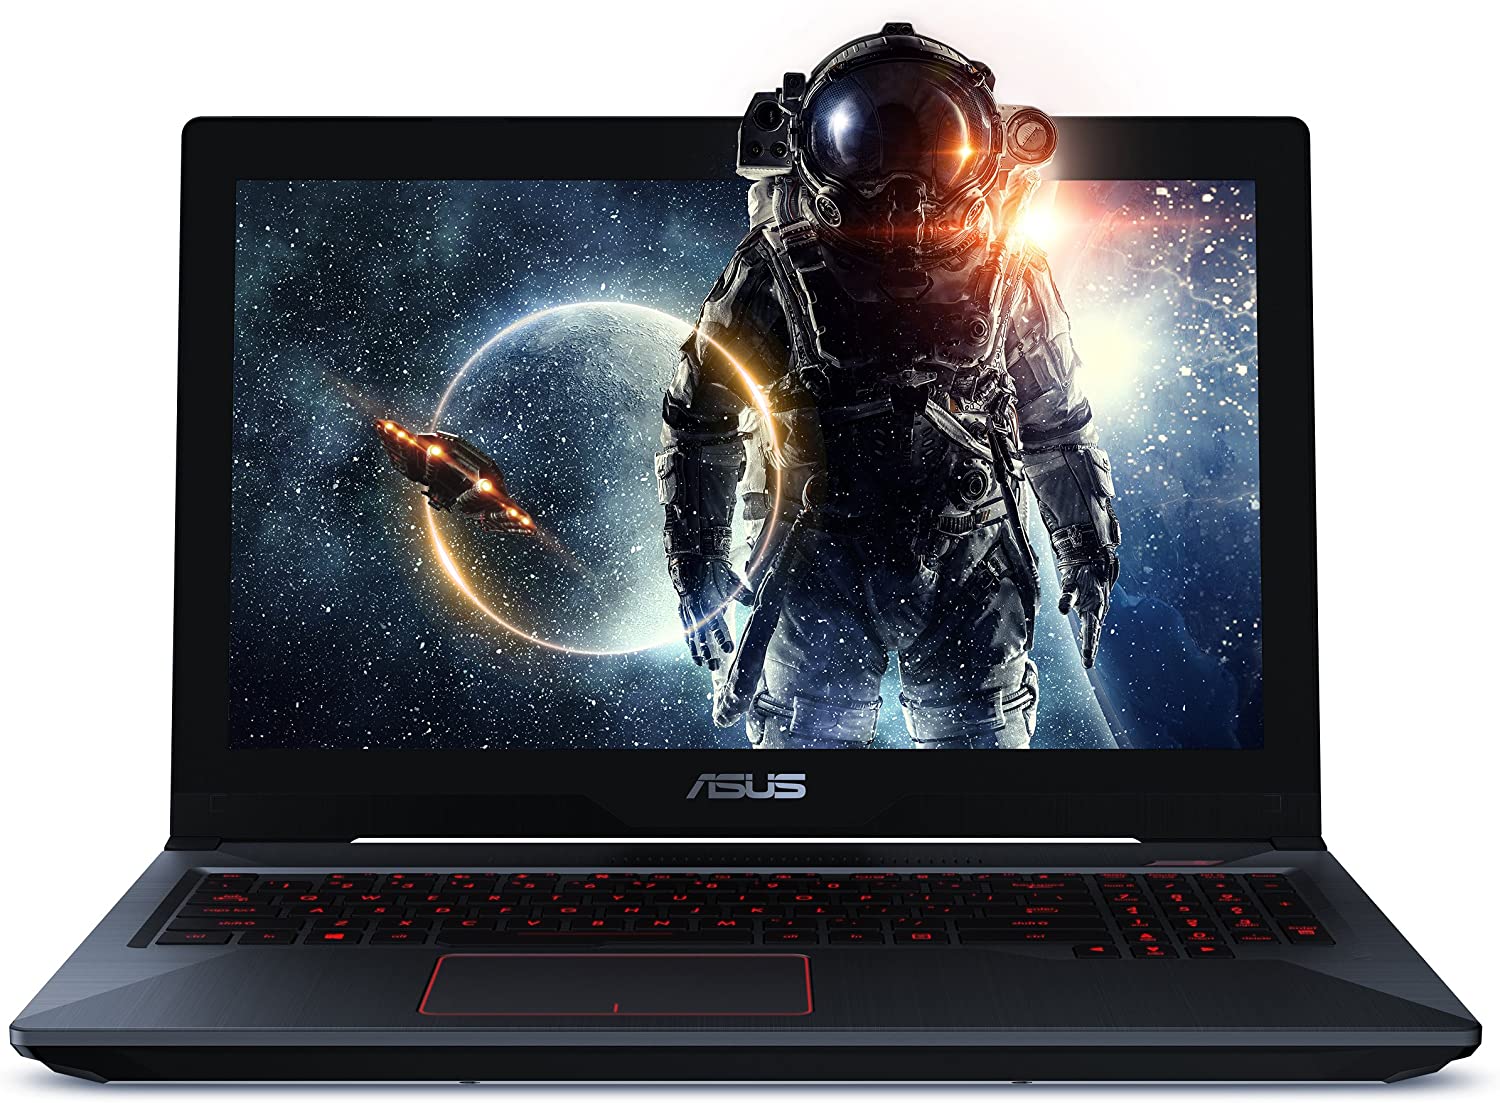 This image shows the ASUS ROG FX503 Gaming Laptop.